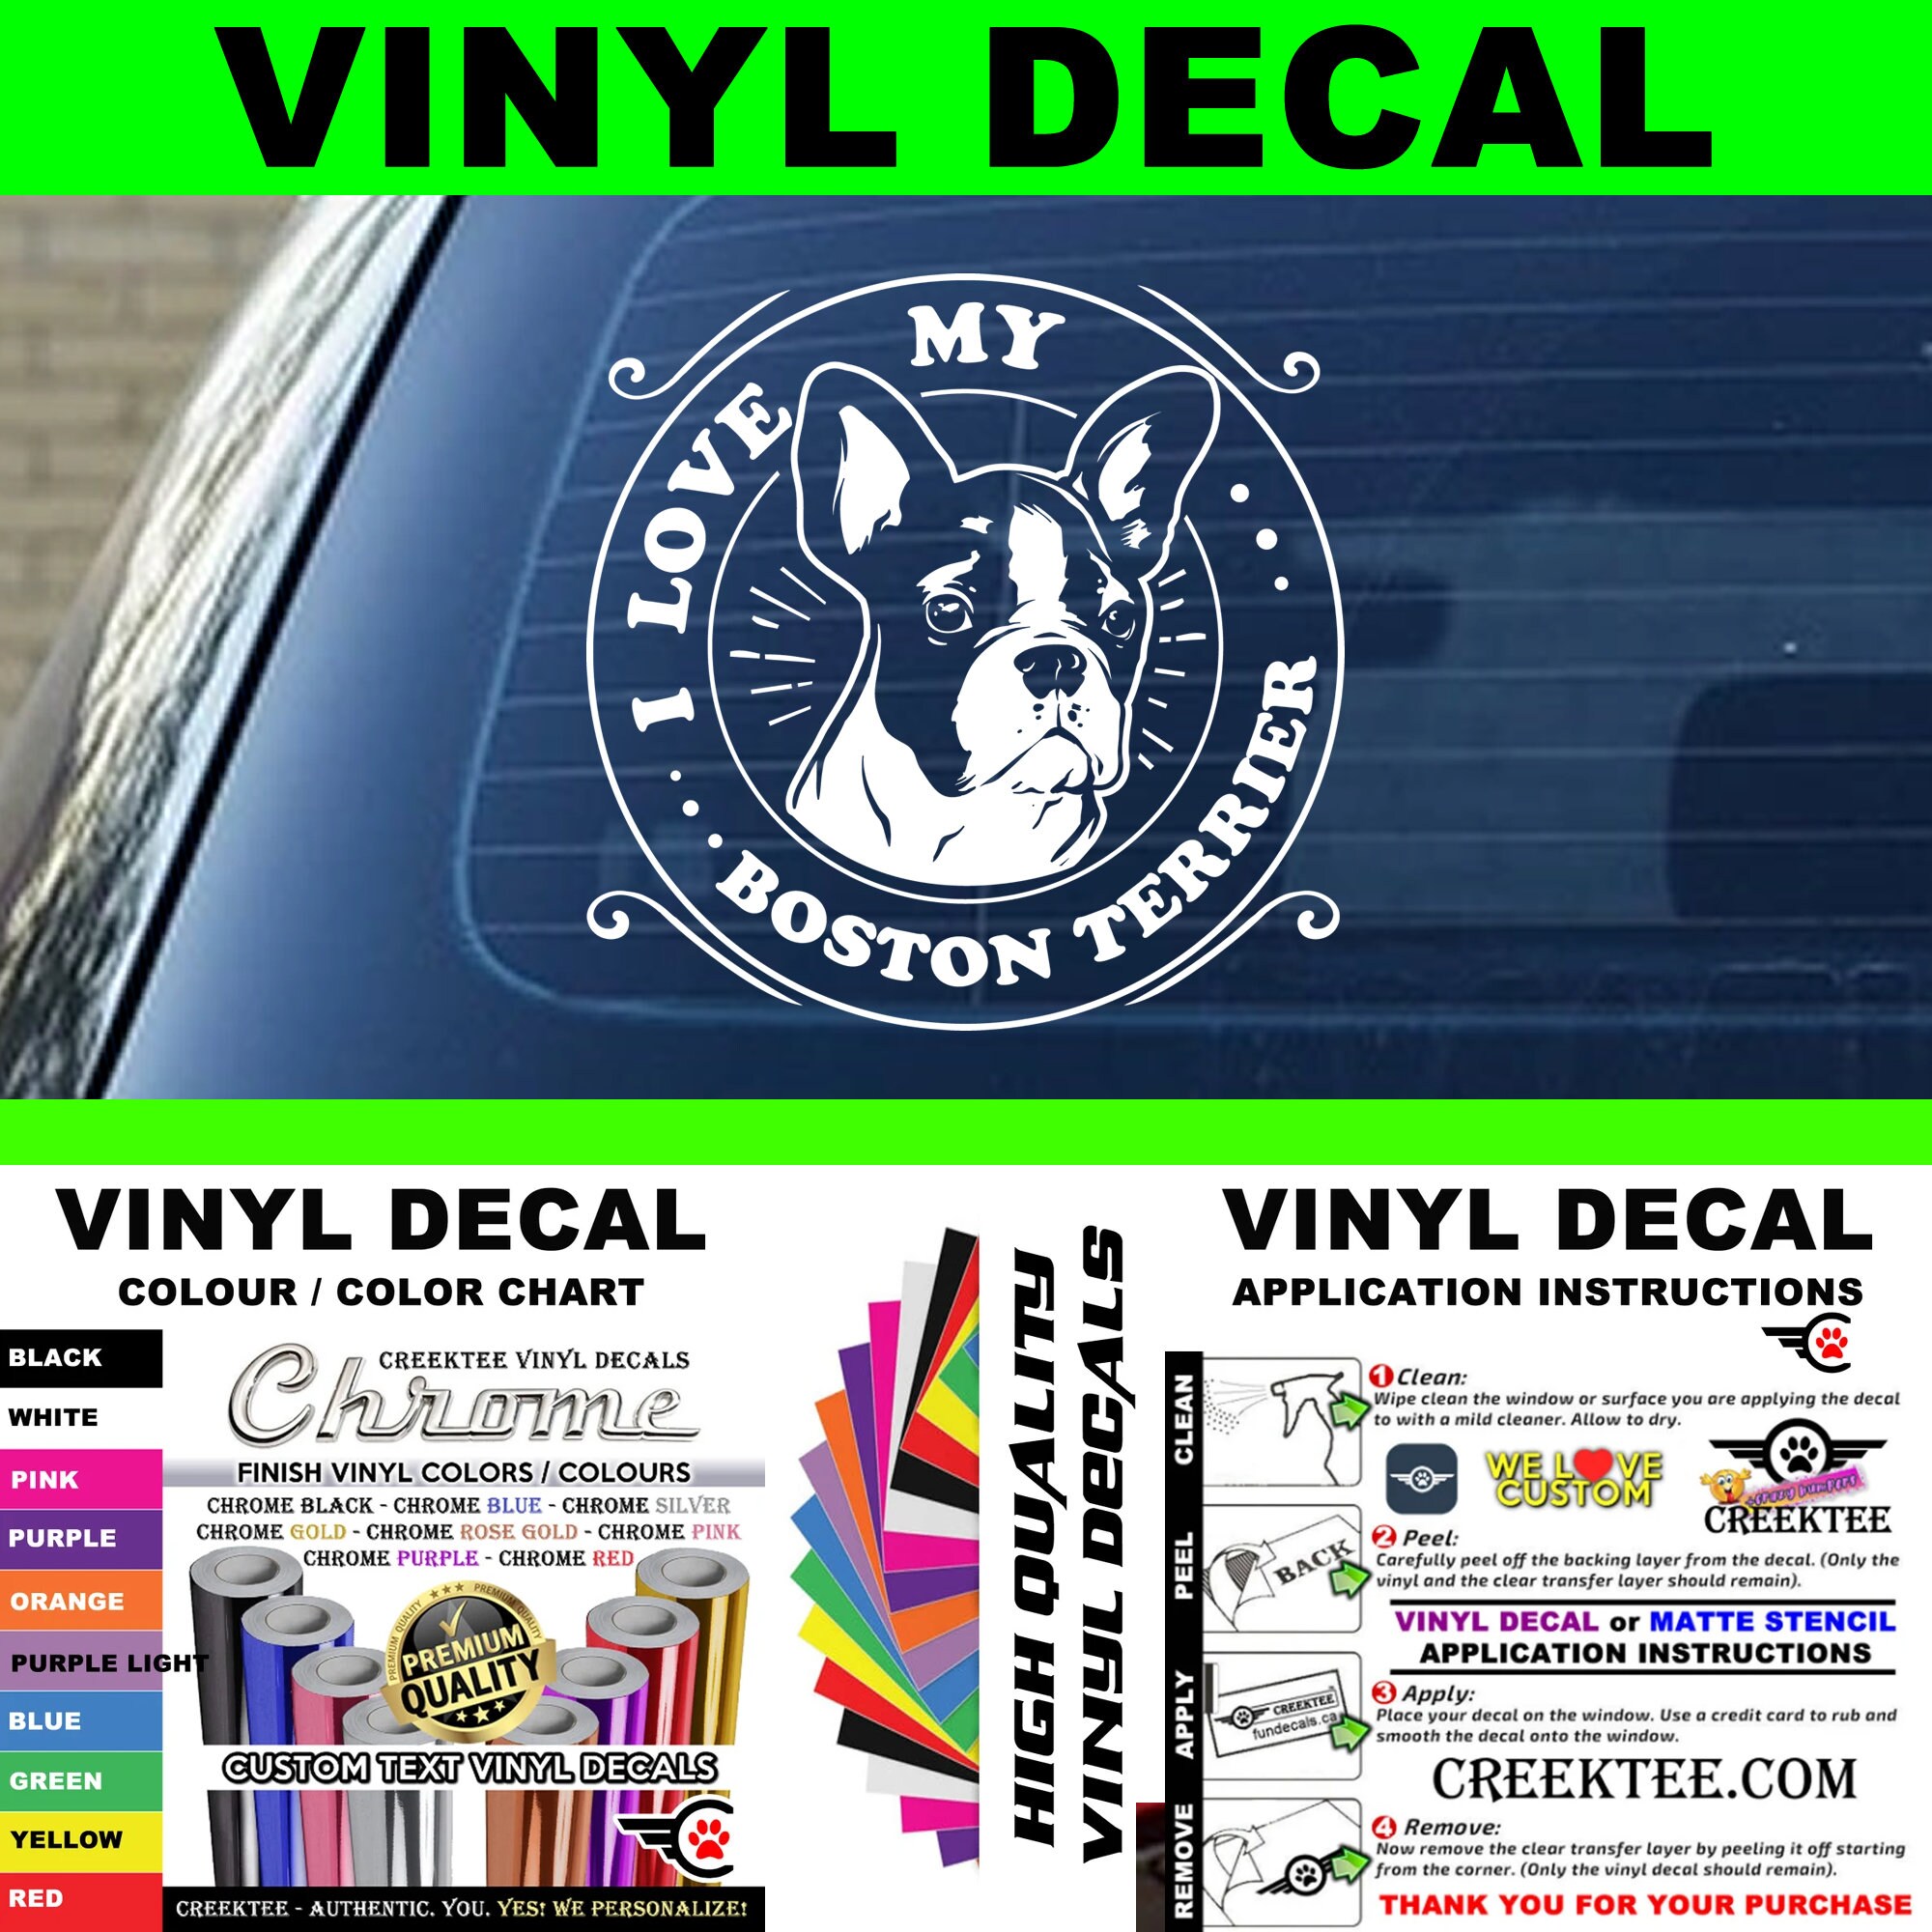 I Love My Boston Terrier Dog Vinyl Decal Various Sizes and Colors Die Cut Vinyl Decal also in Cool Chrome Colors!